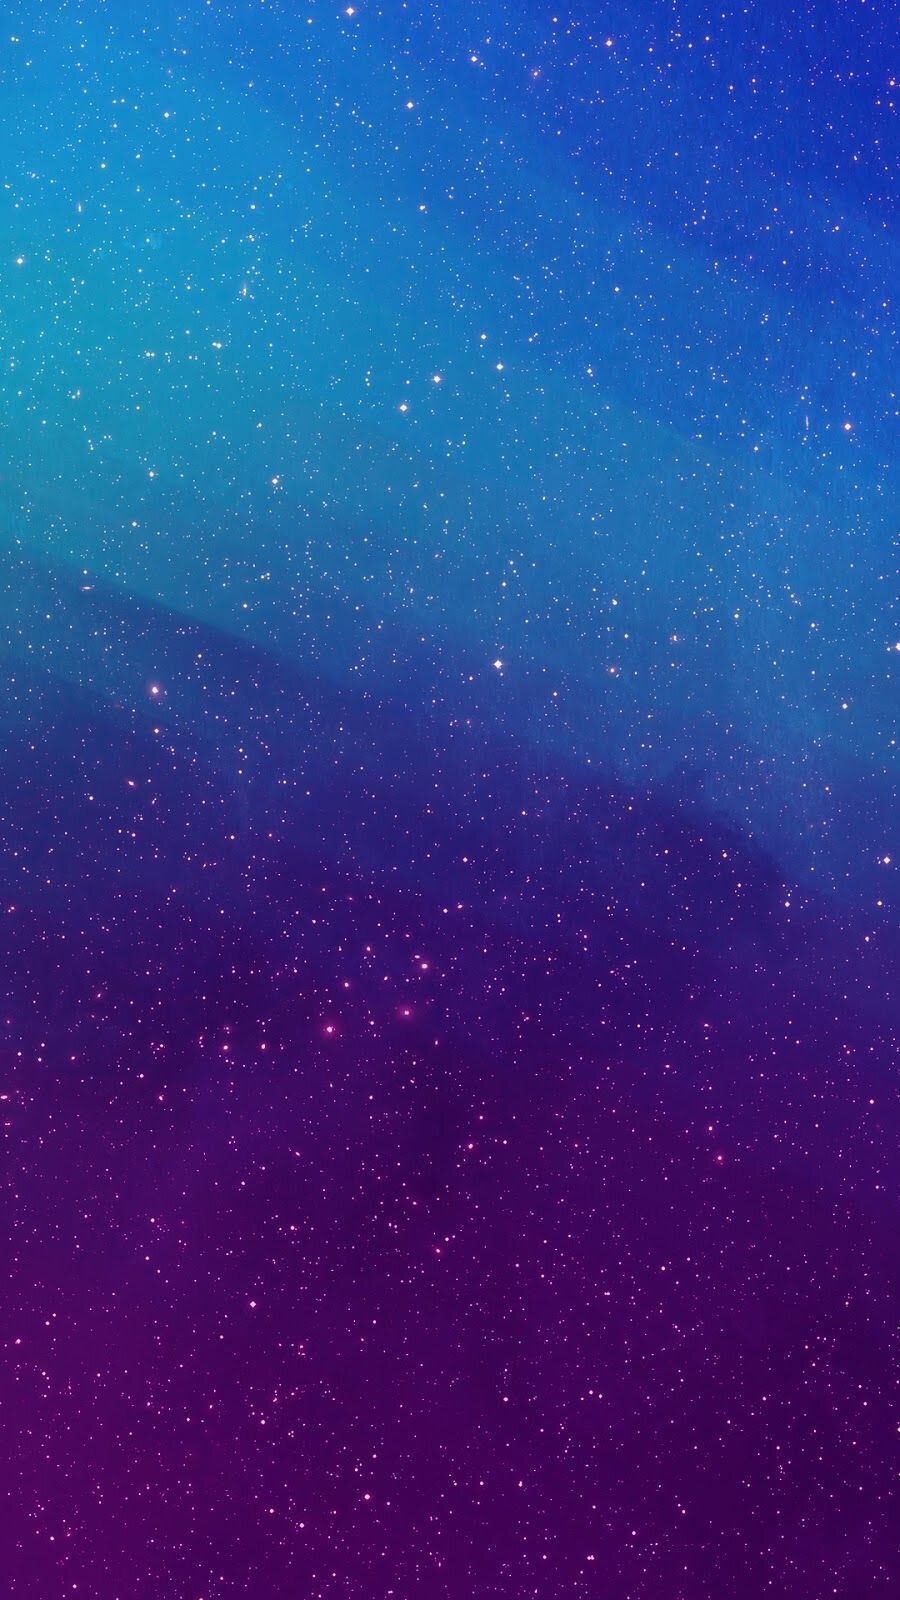 A purple and blue sky with stars - Pride